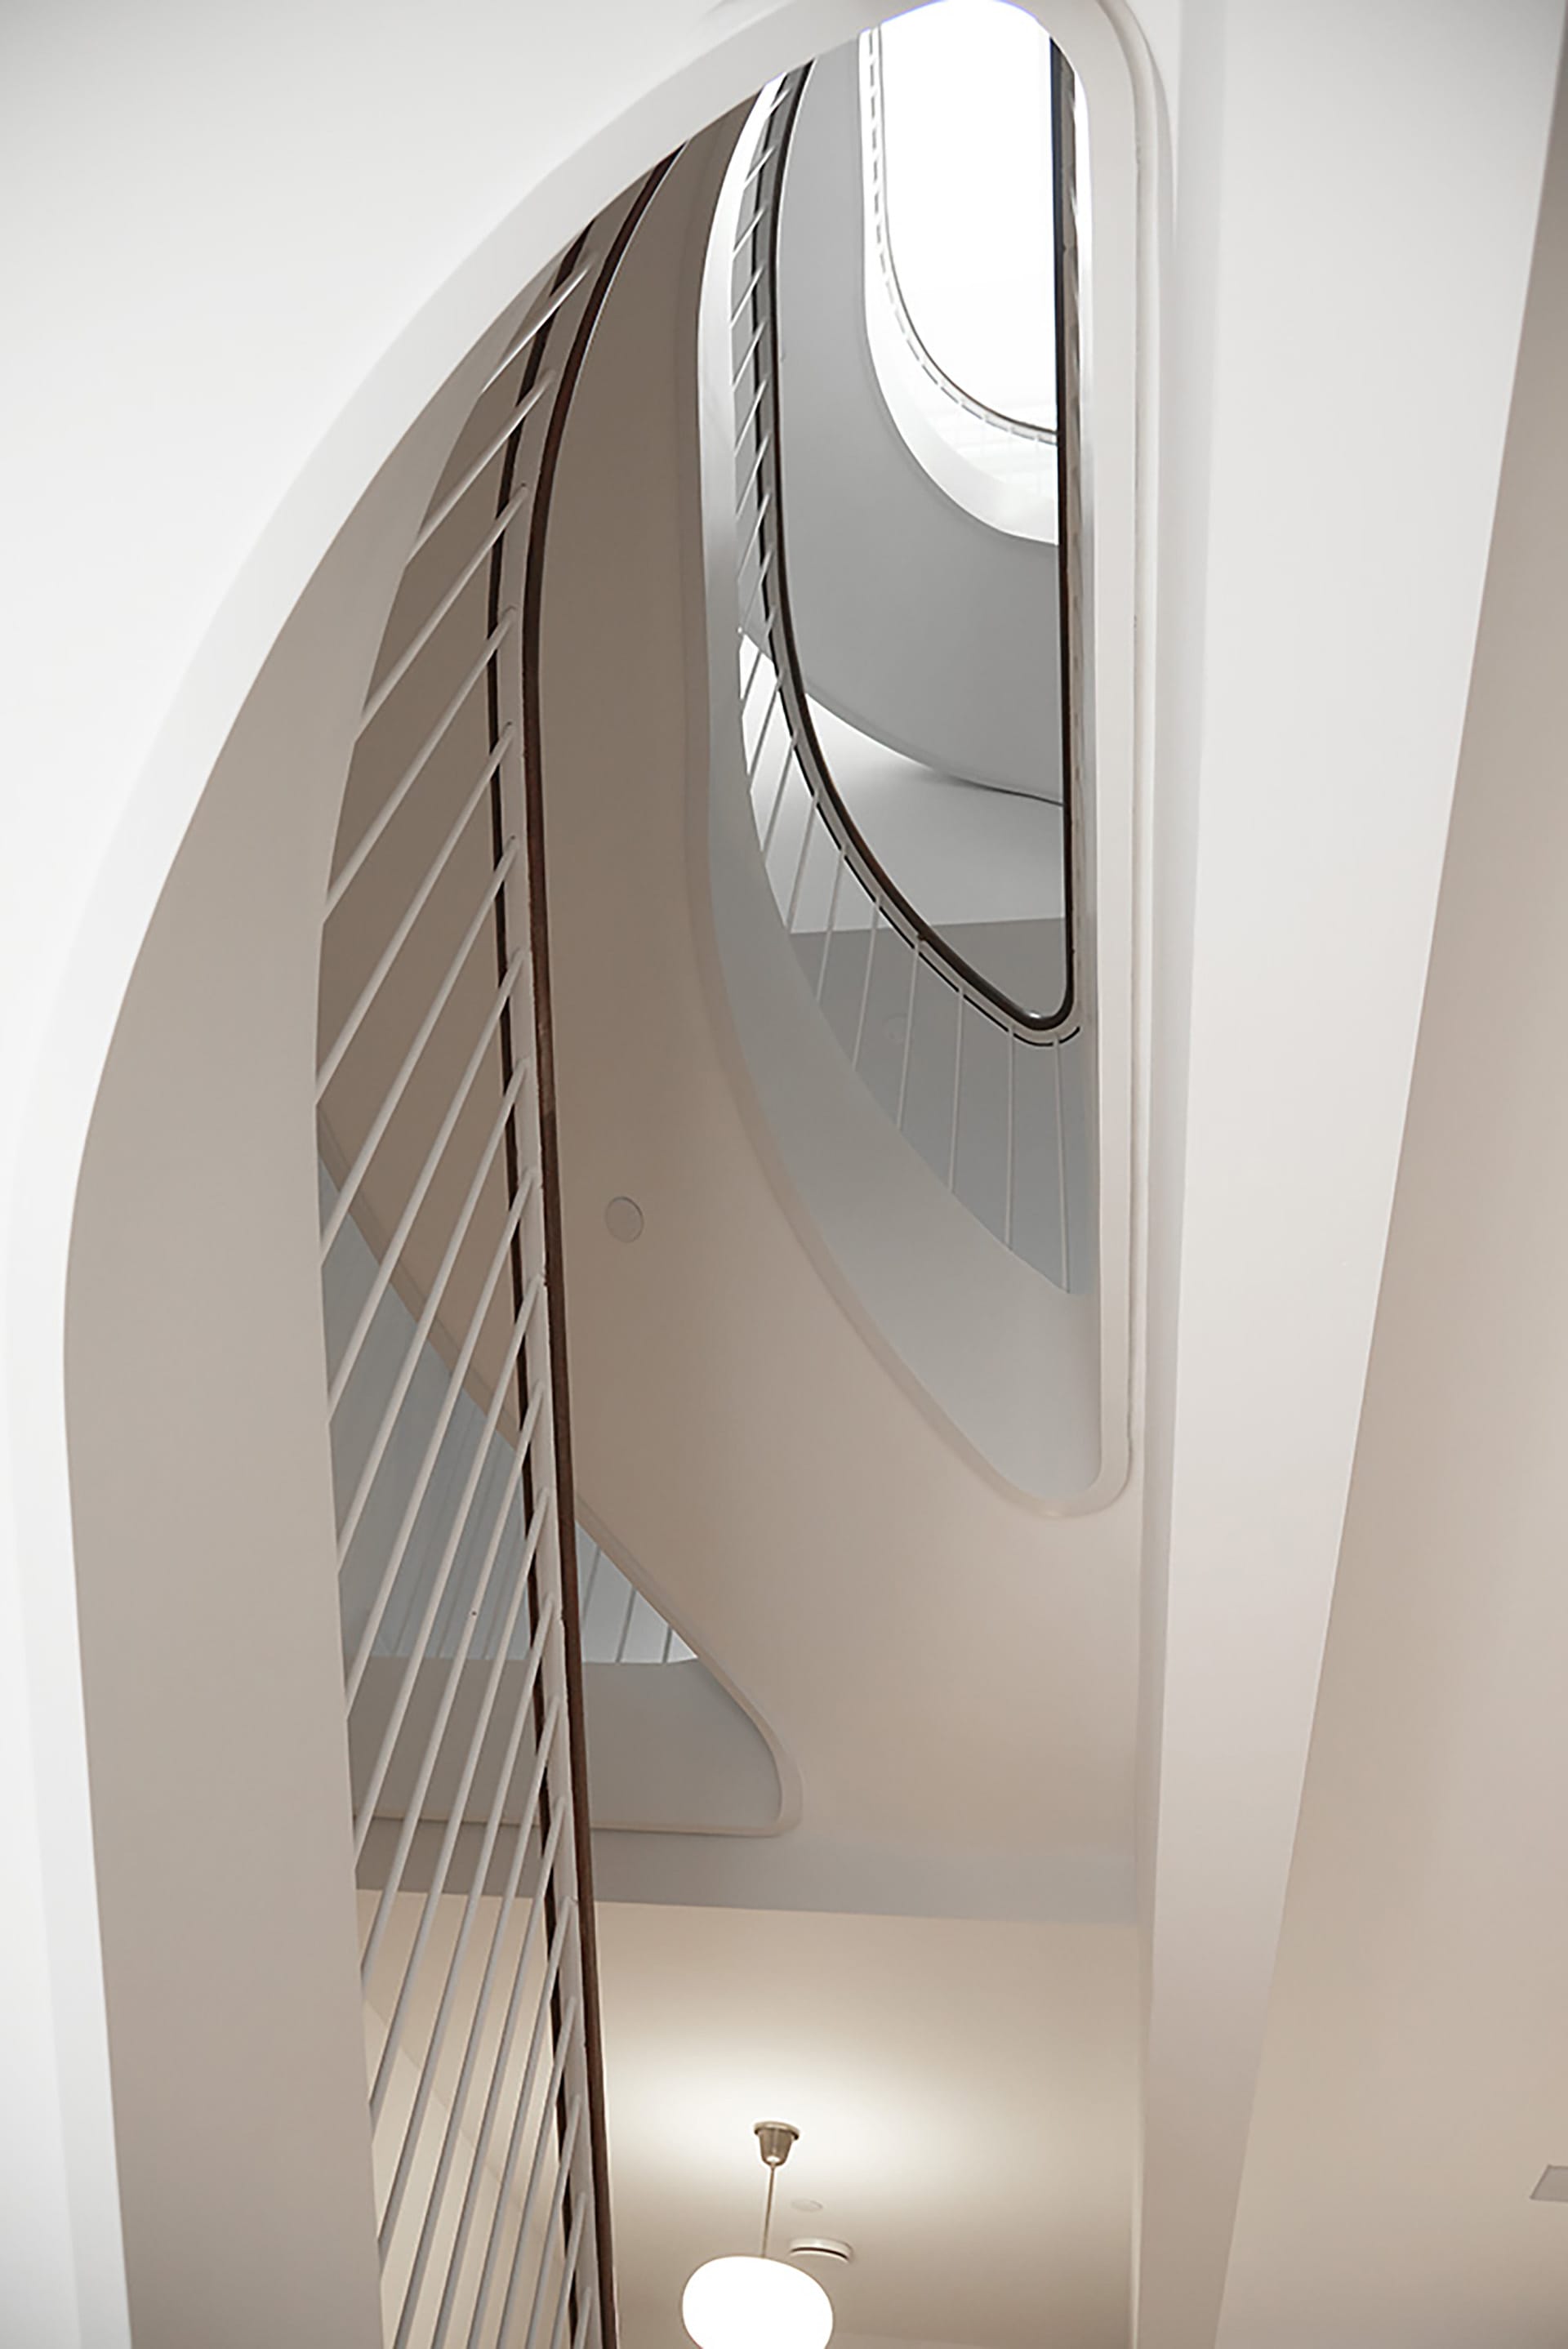 White sculptural staircase in a Brooklyn Heights Passive House. Three stories of the staircase are viewed from below.